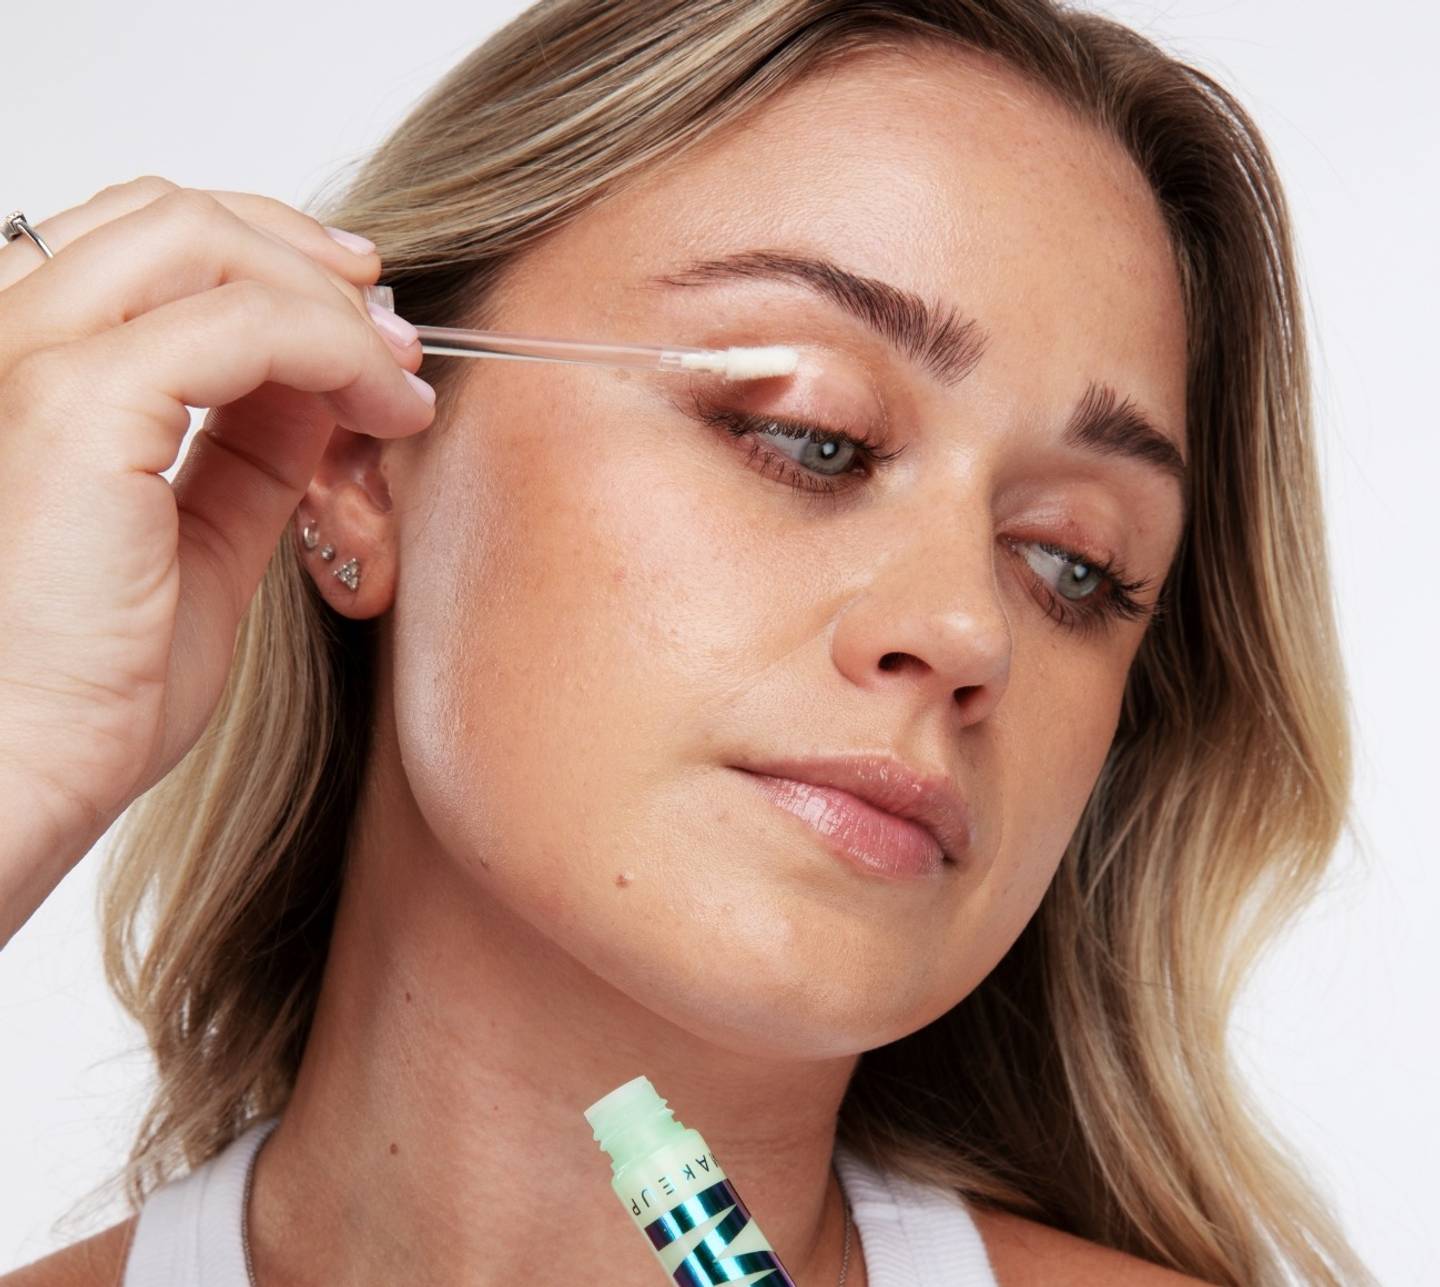 Model applies Milk Makeup Eye Primer to her lids on a white background